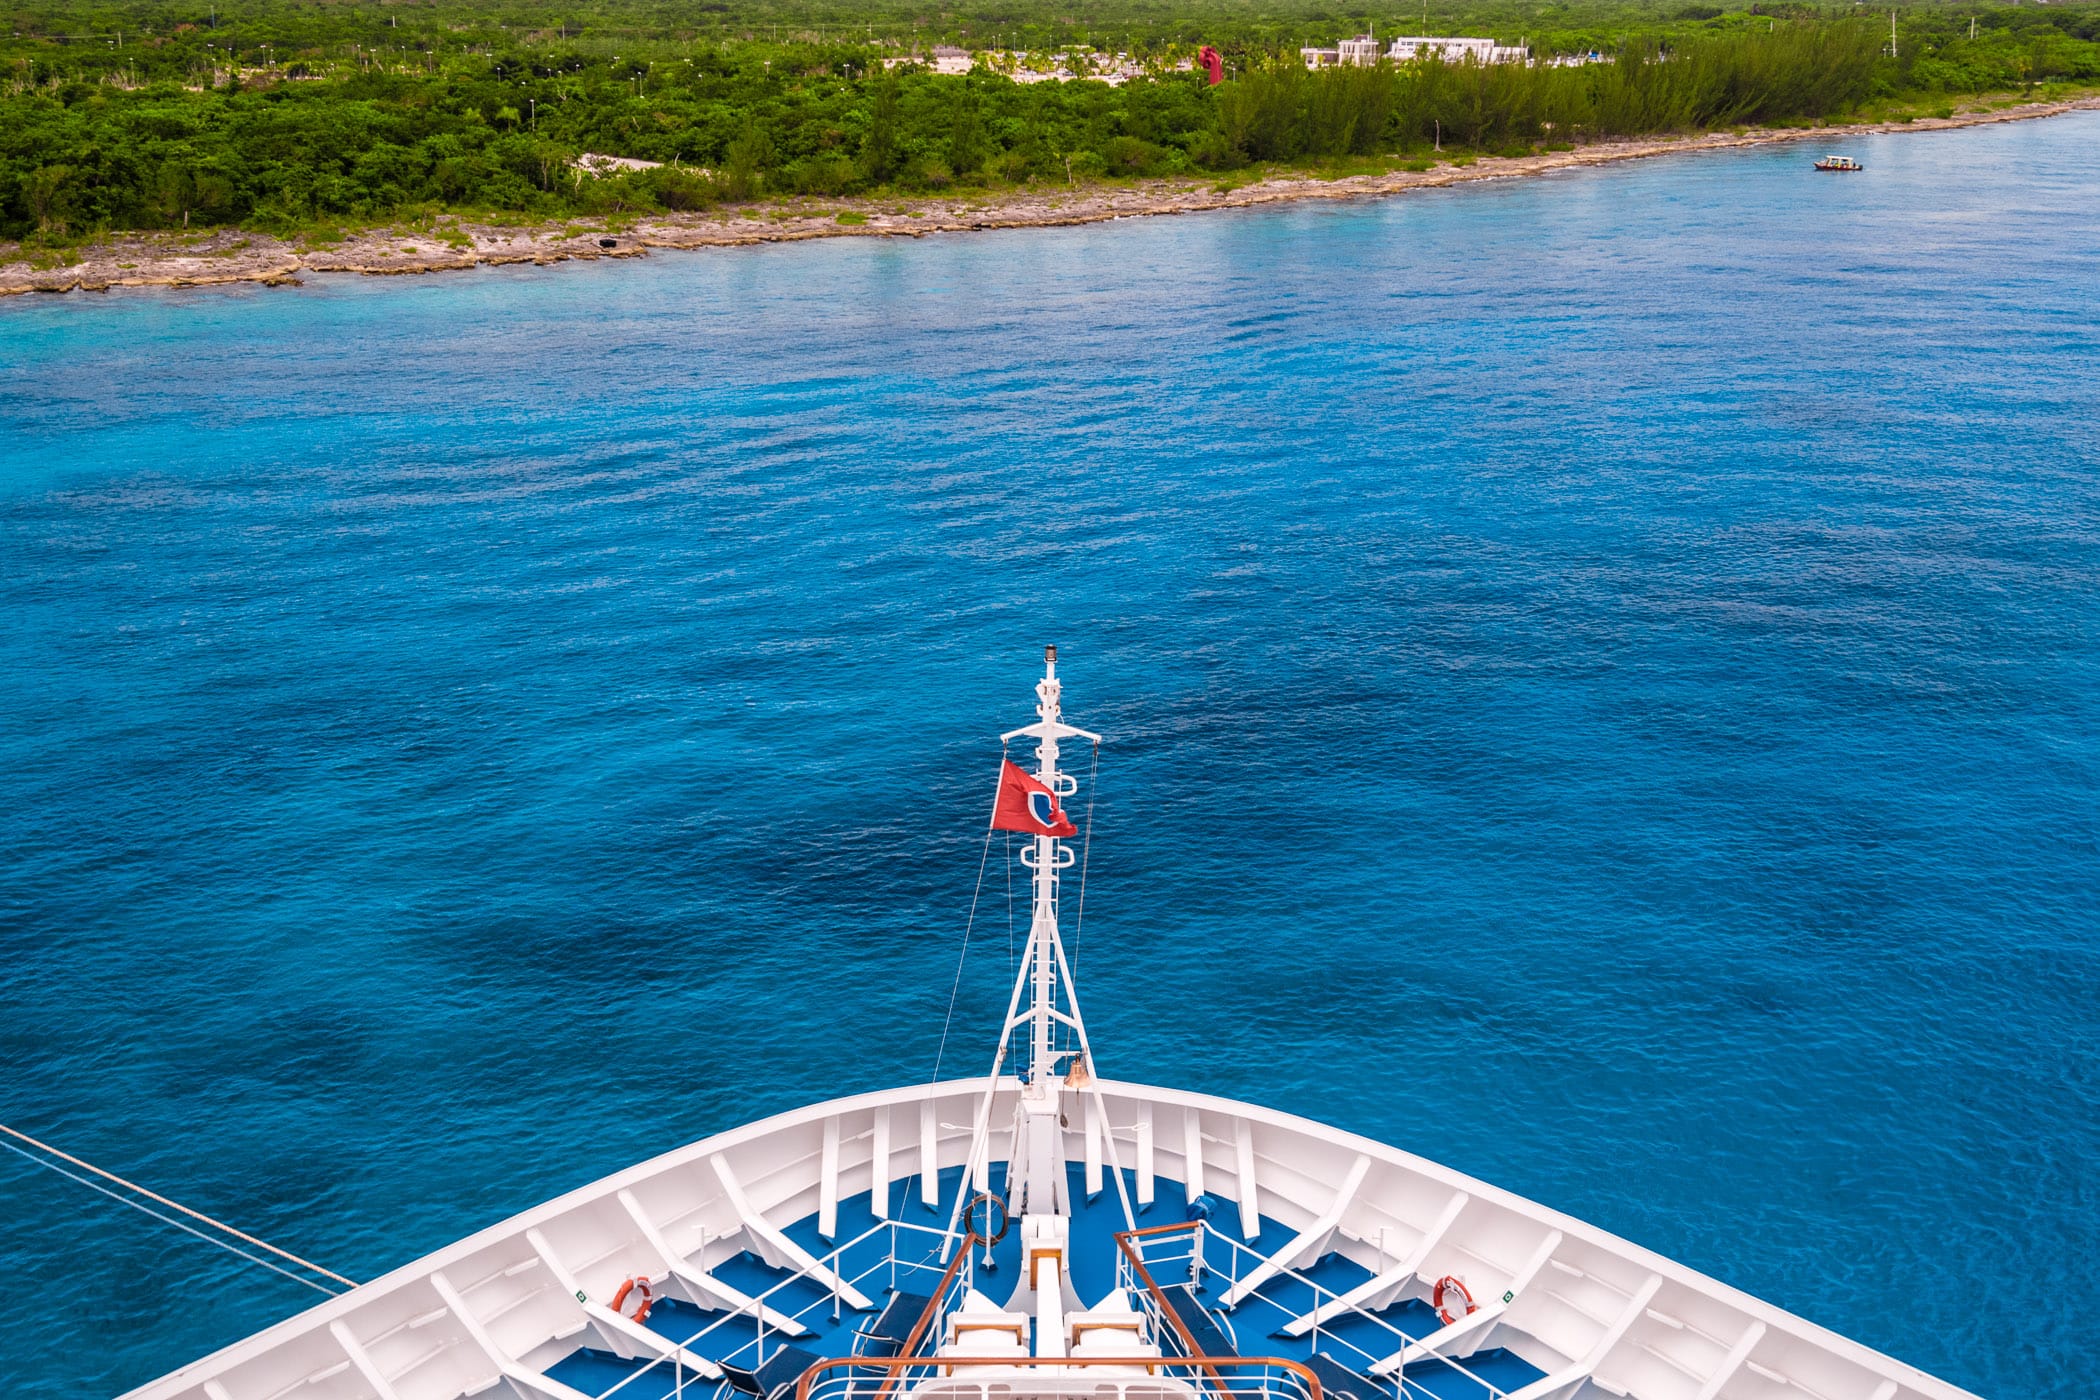 The bow of the cruise ship Carnival Breeze floats in the blue waters just off the coast of Cozumel, Mexico.